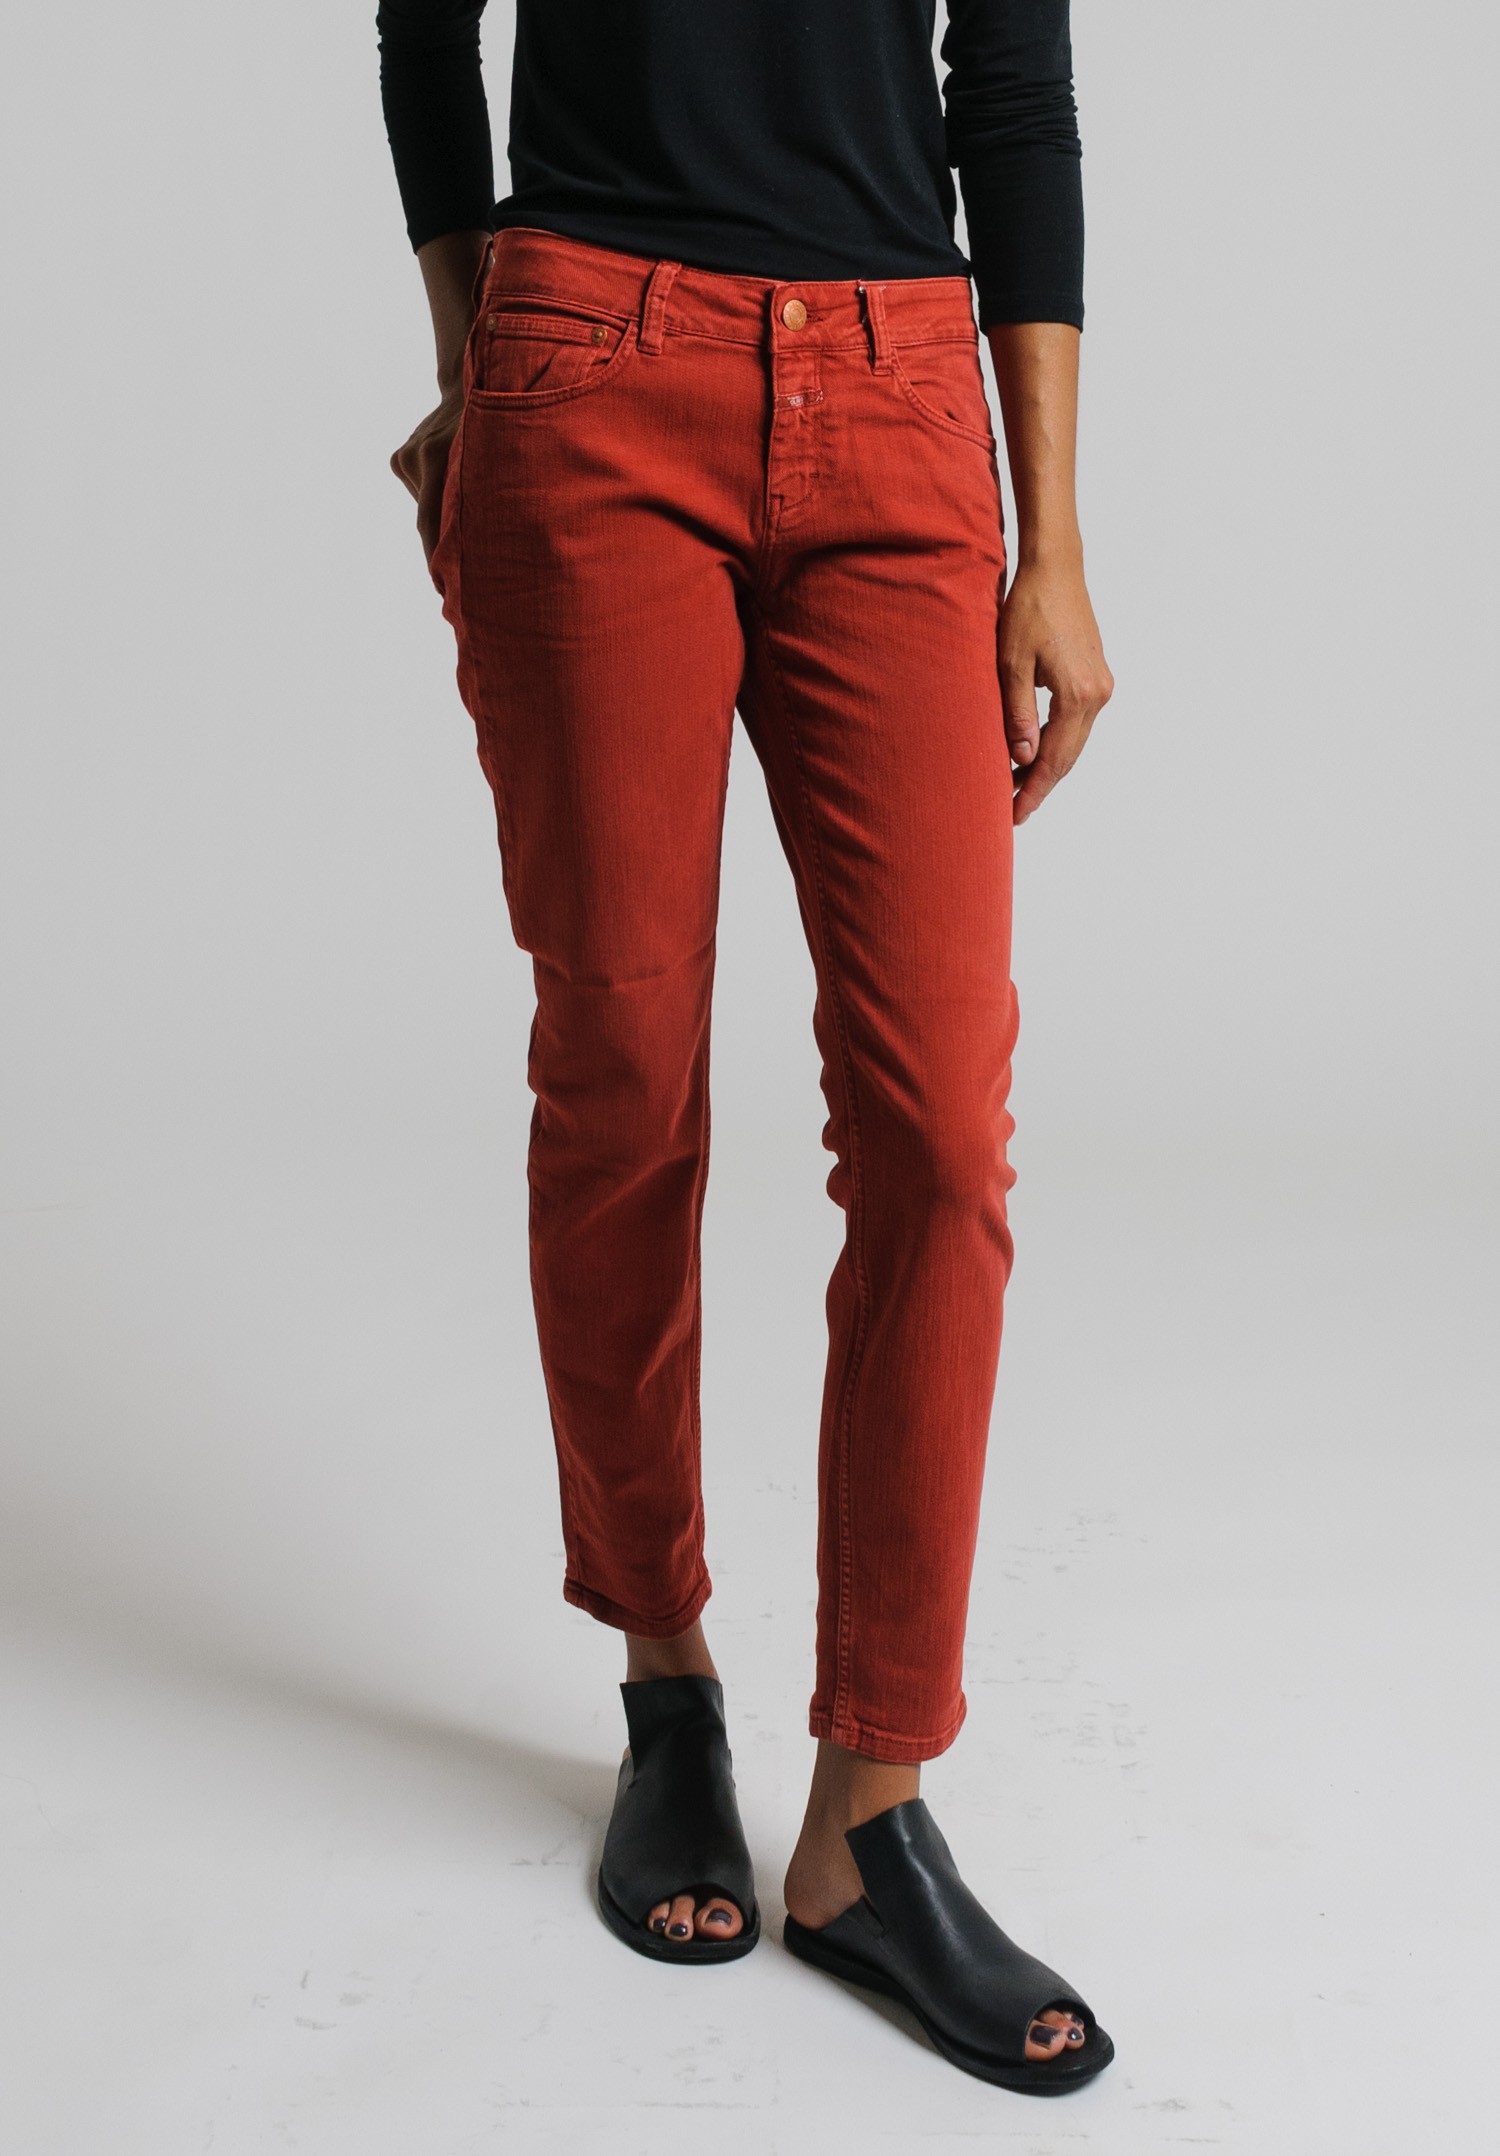 Closed Cropped Narrow Jeans in Brick | Santa Fe Dry Goods Trippen ...